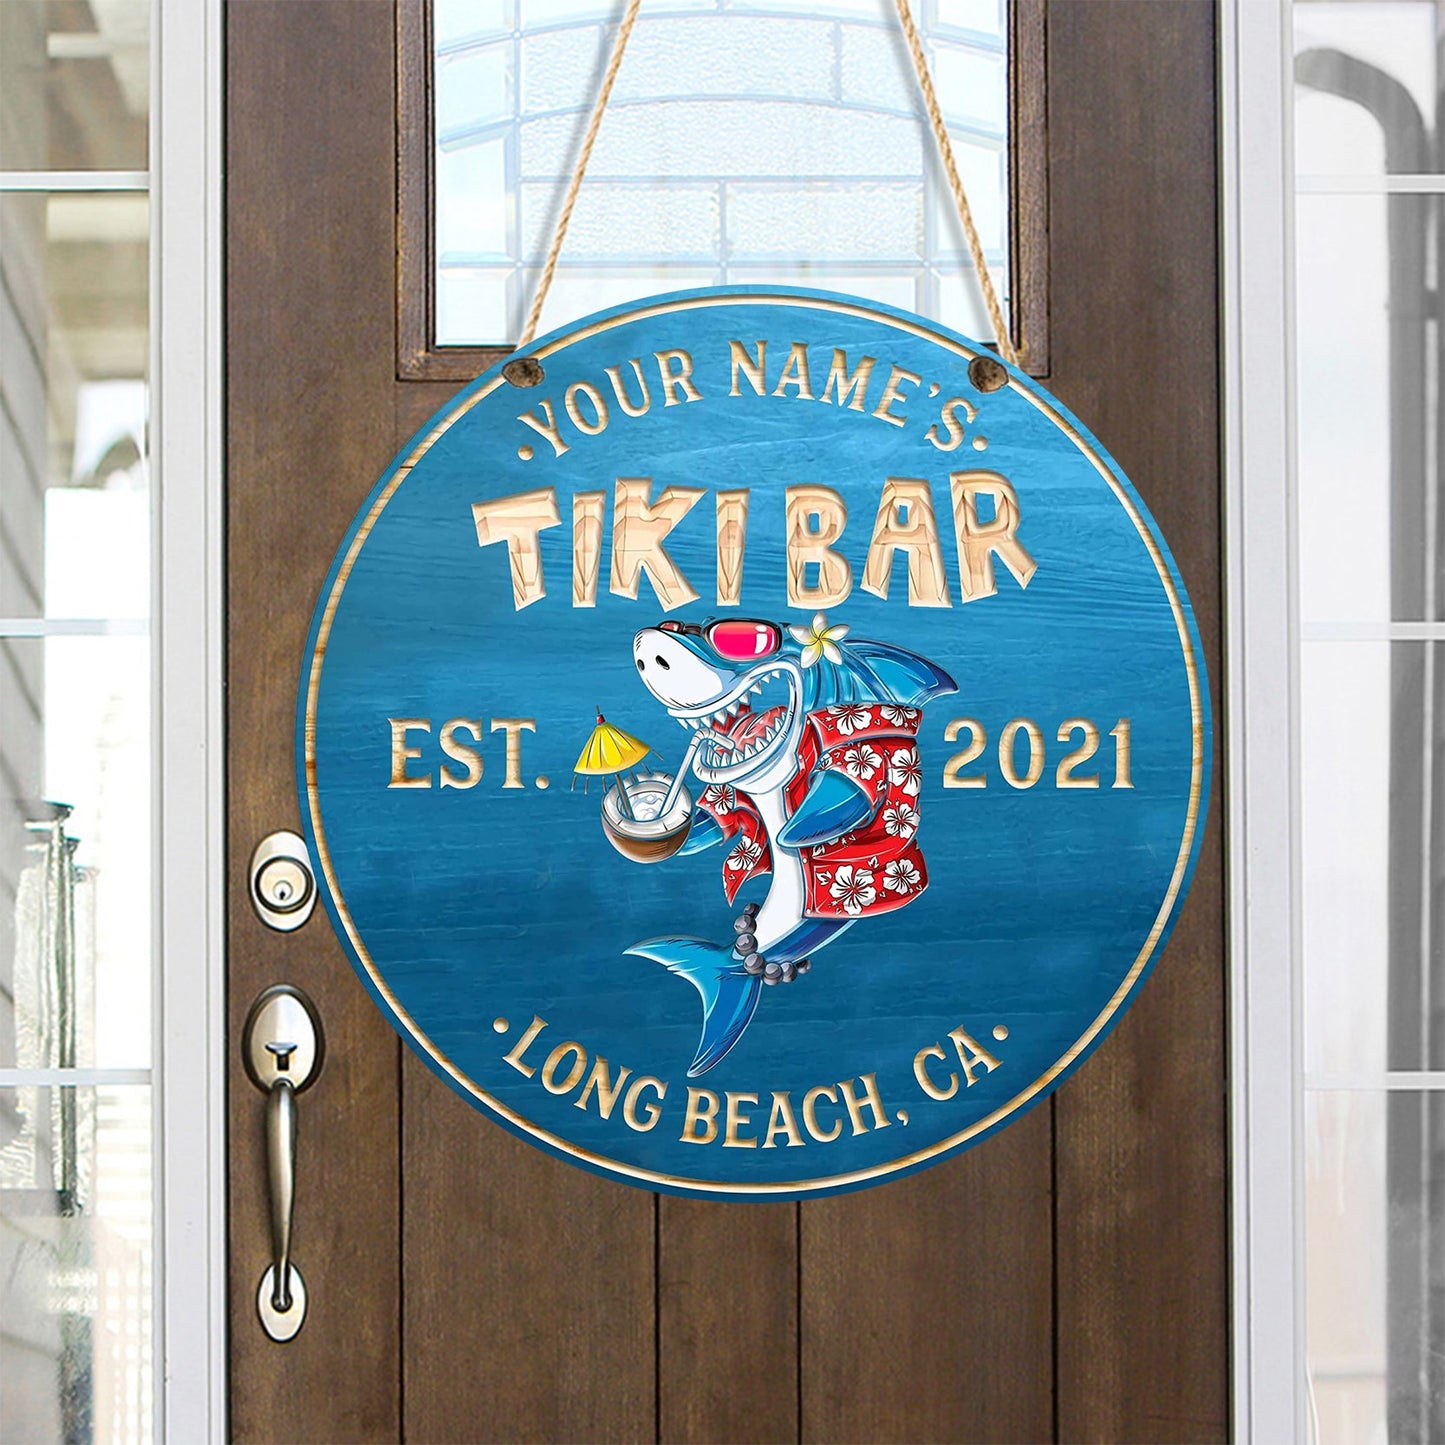 Personalized Round Wooden Shark Tiki Bar Sign - (Not Carved)